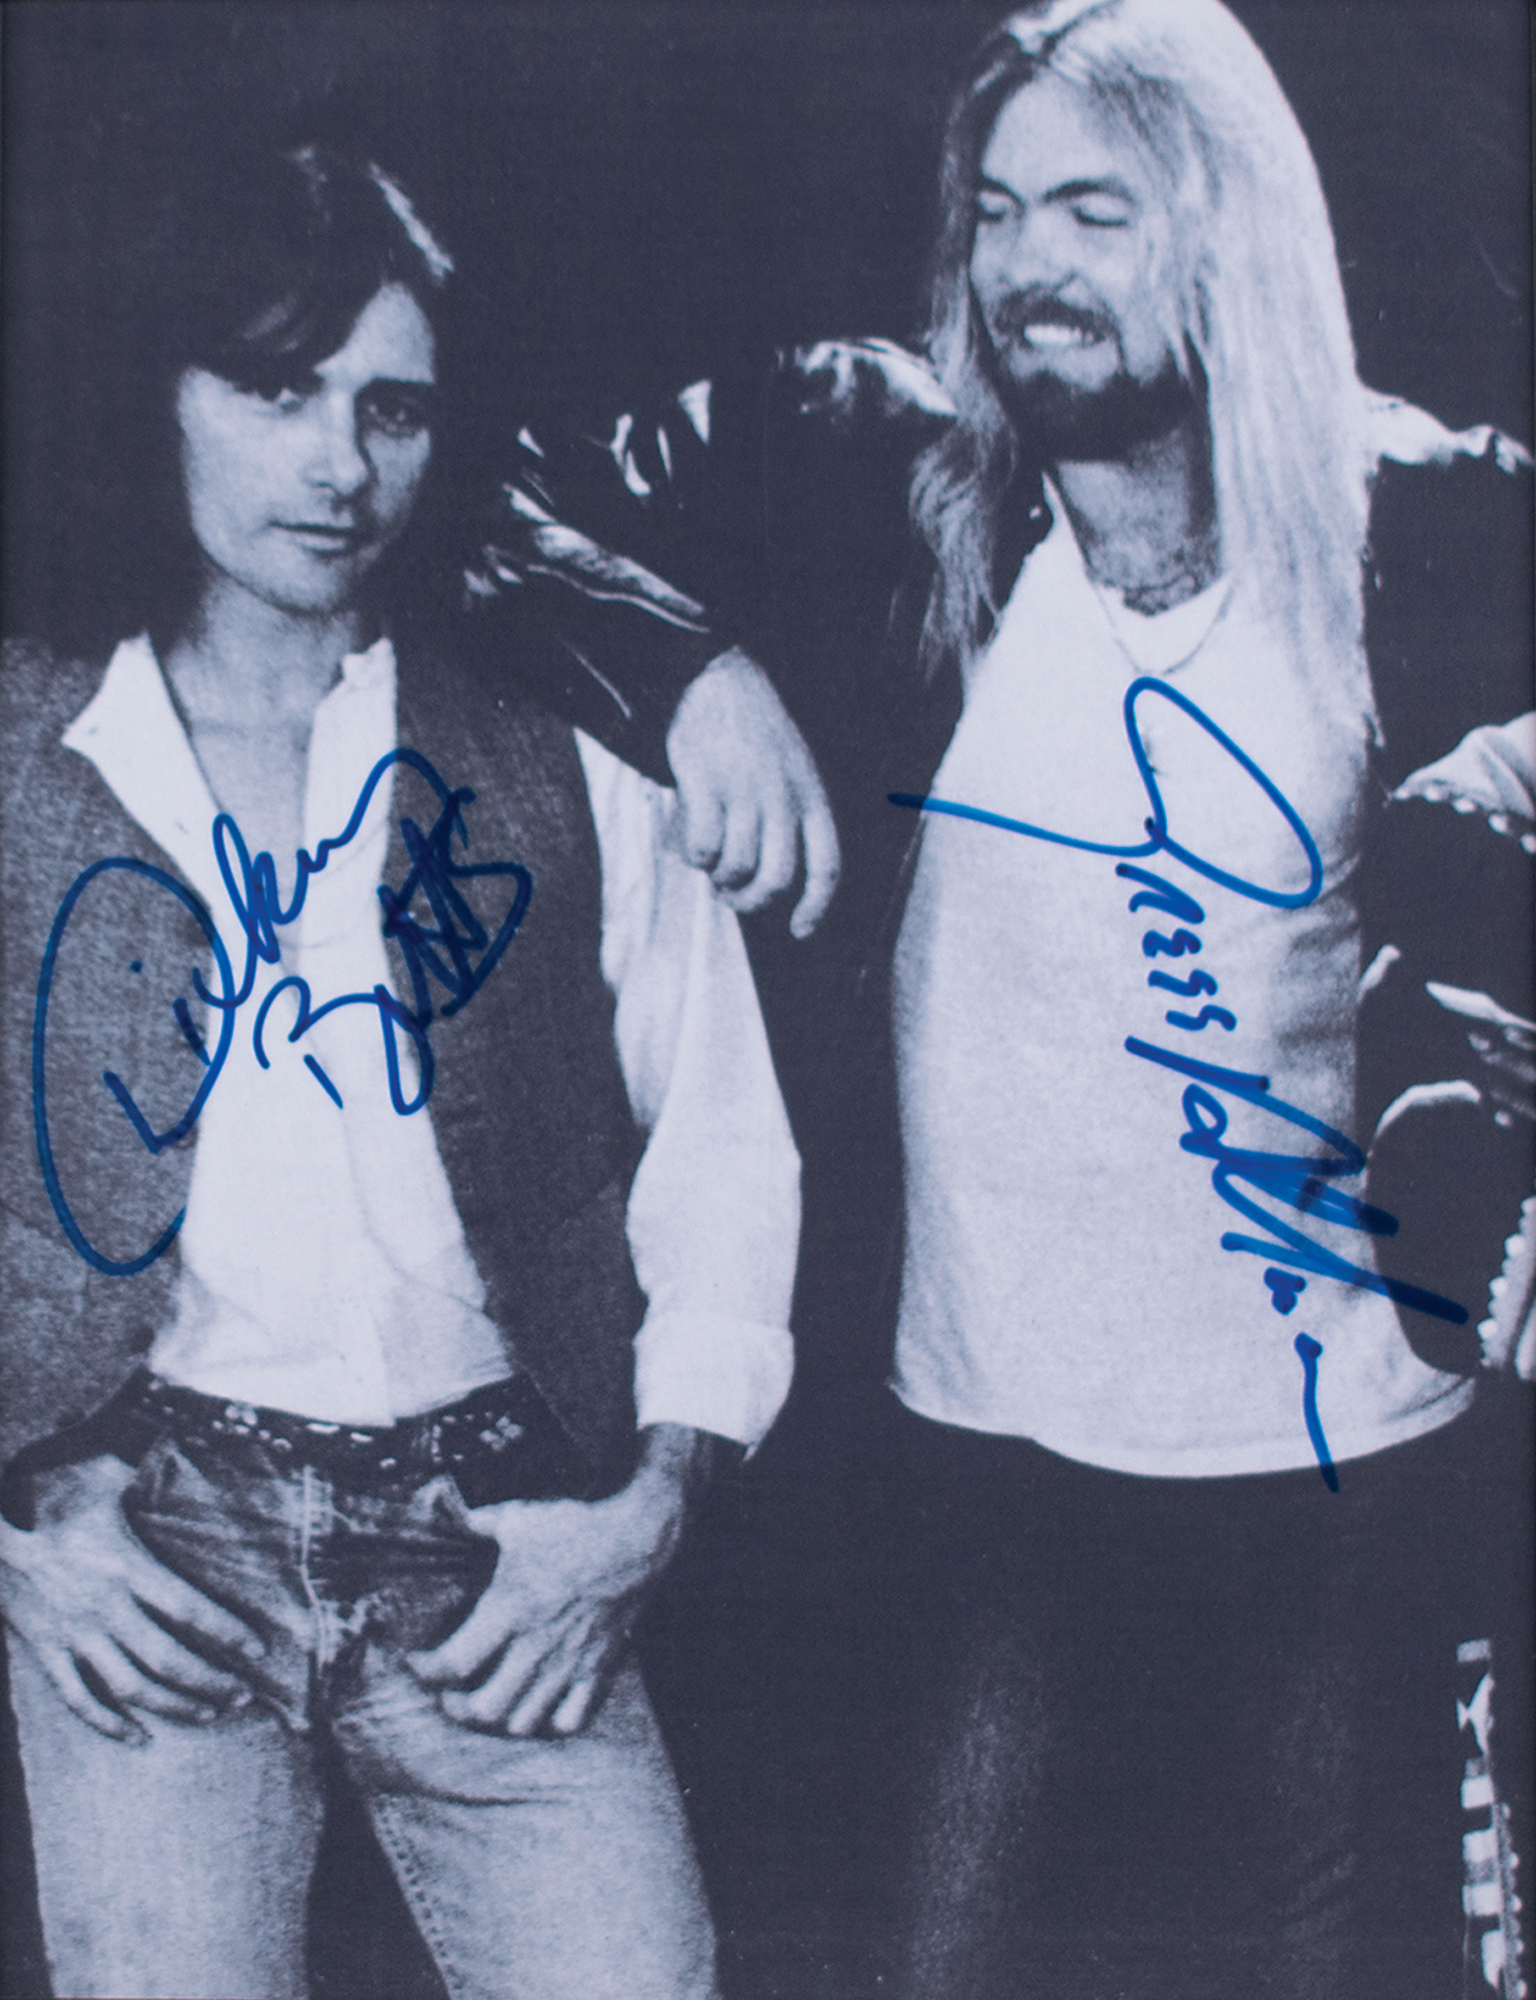 Lot #726 Gregg Allman and Dickie Betts Signed Photograph